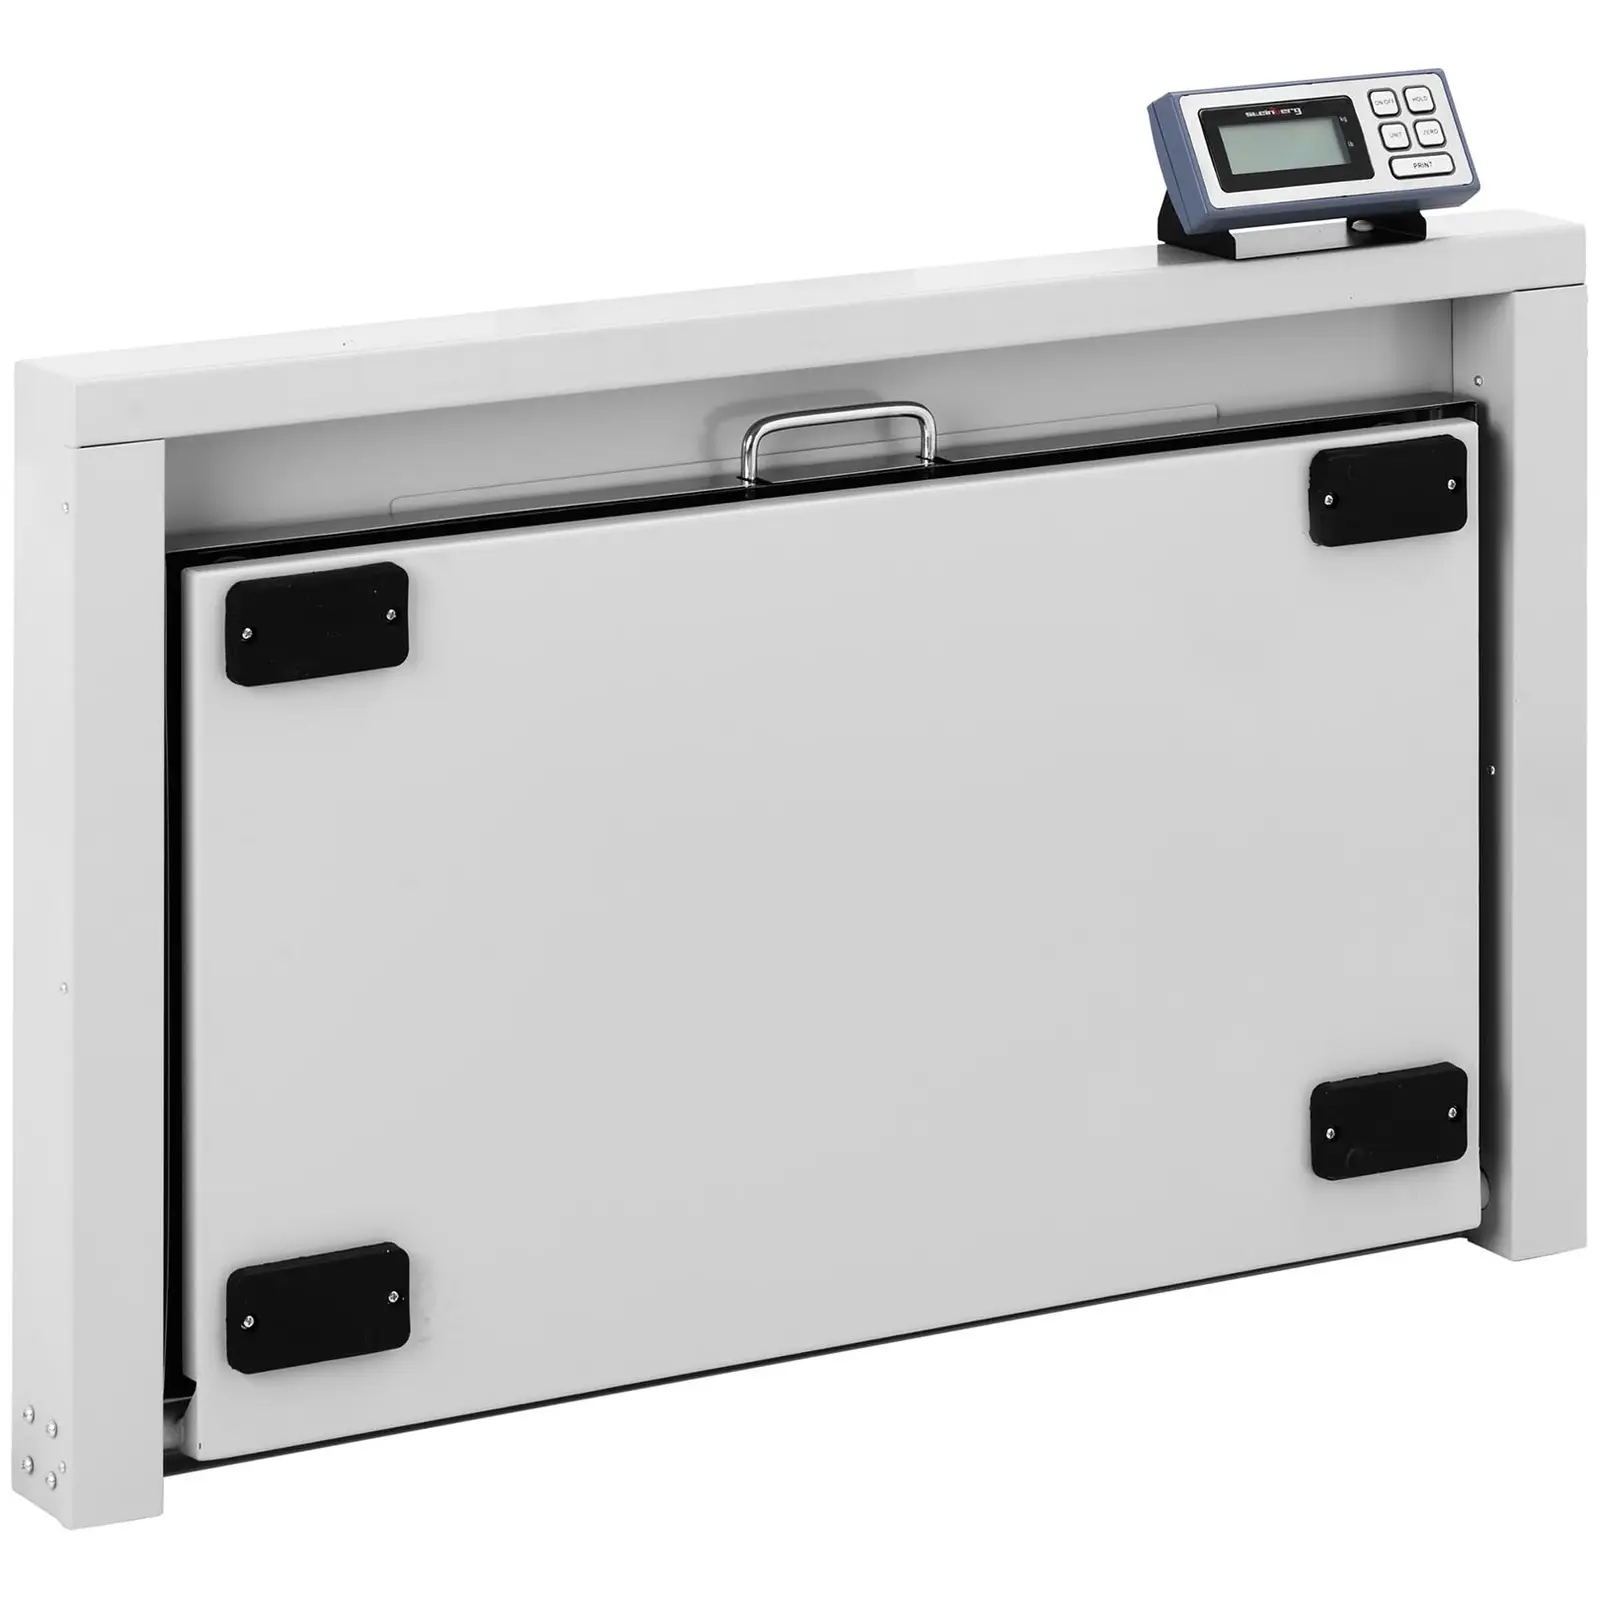 Factory second Industrial Scale - 150 kg / 50 g - anti-slip mat - foldable - LCD